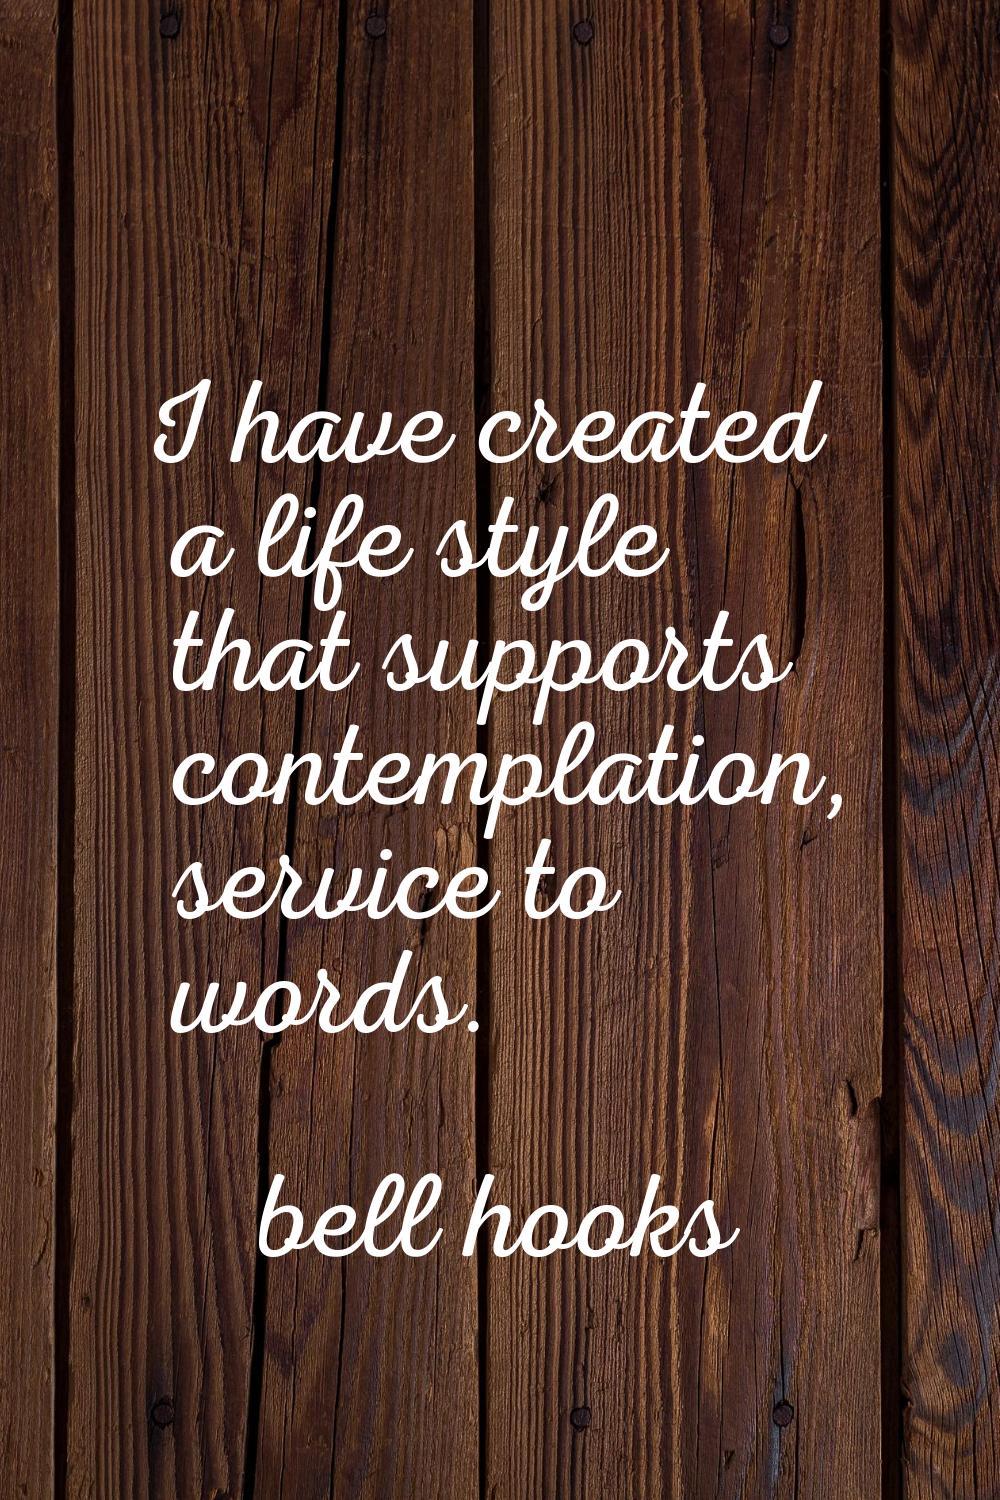 I have created a life style that supports contemplation, service to words.